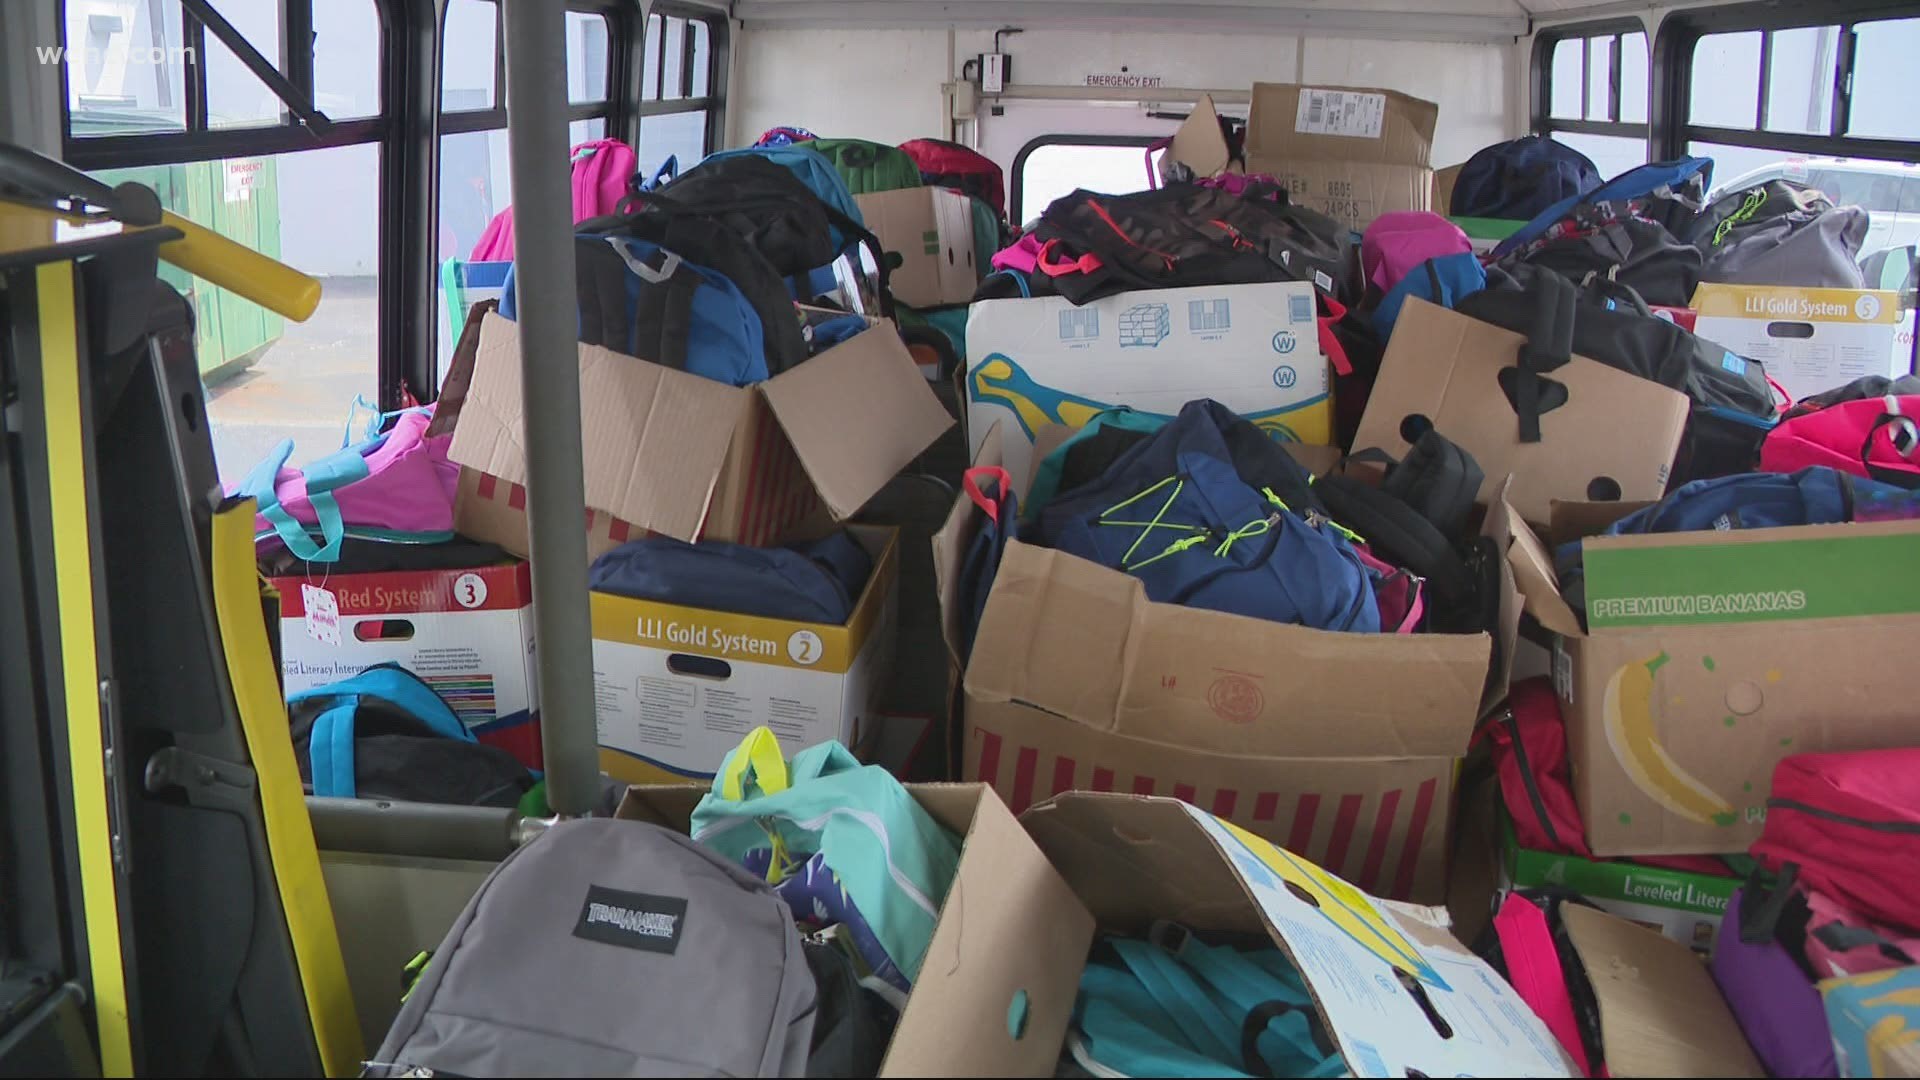 A nonprofit in Charlotte organized a backpack giveaway for children who otherwise wouldn't be able to afford school supplies for the new school year.